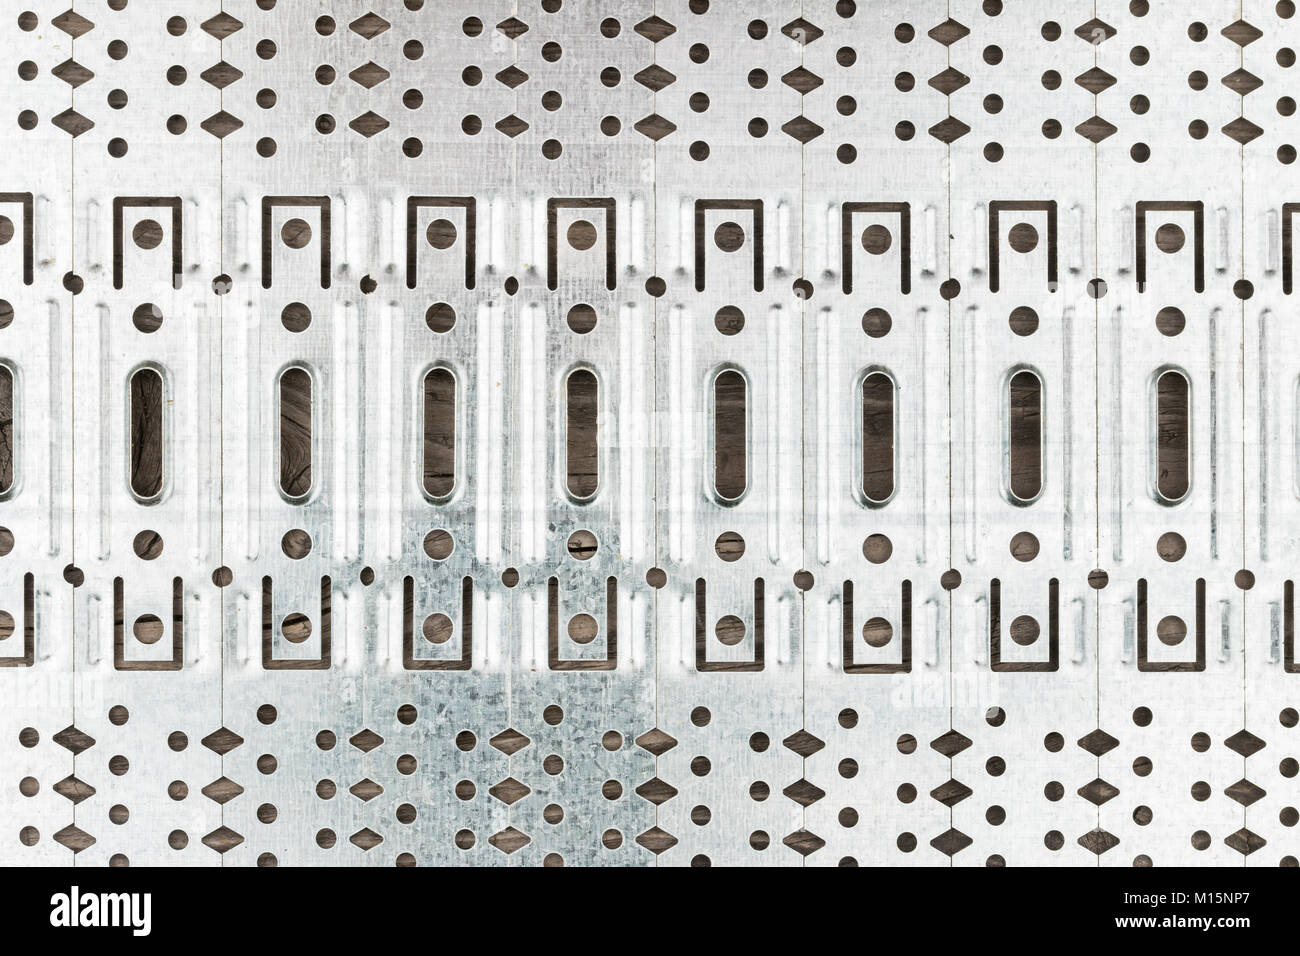 Abstract background of perforated metal plates. View from above Stock Photo